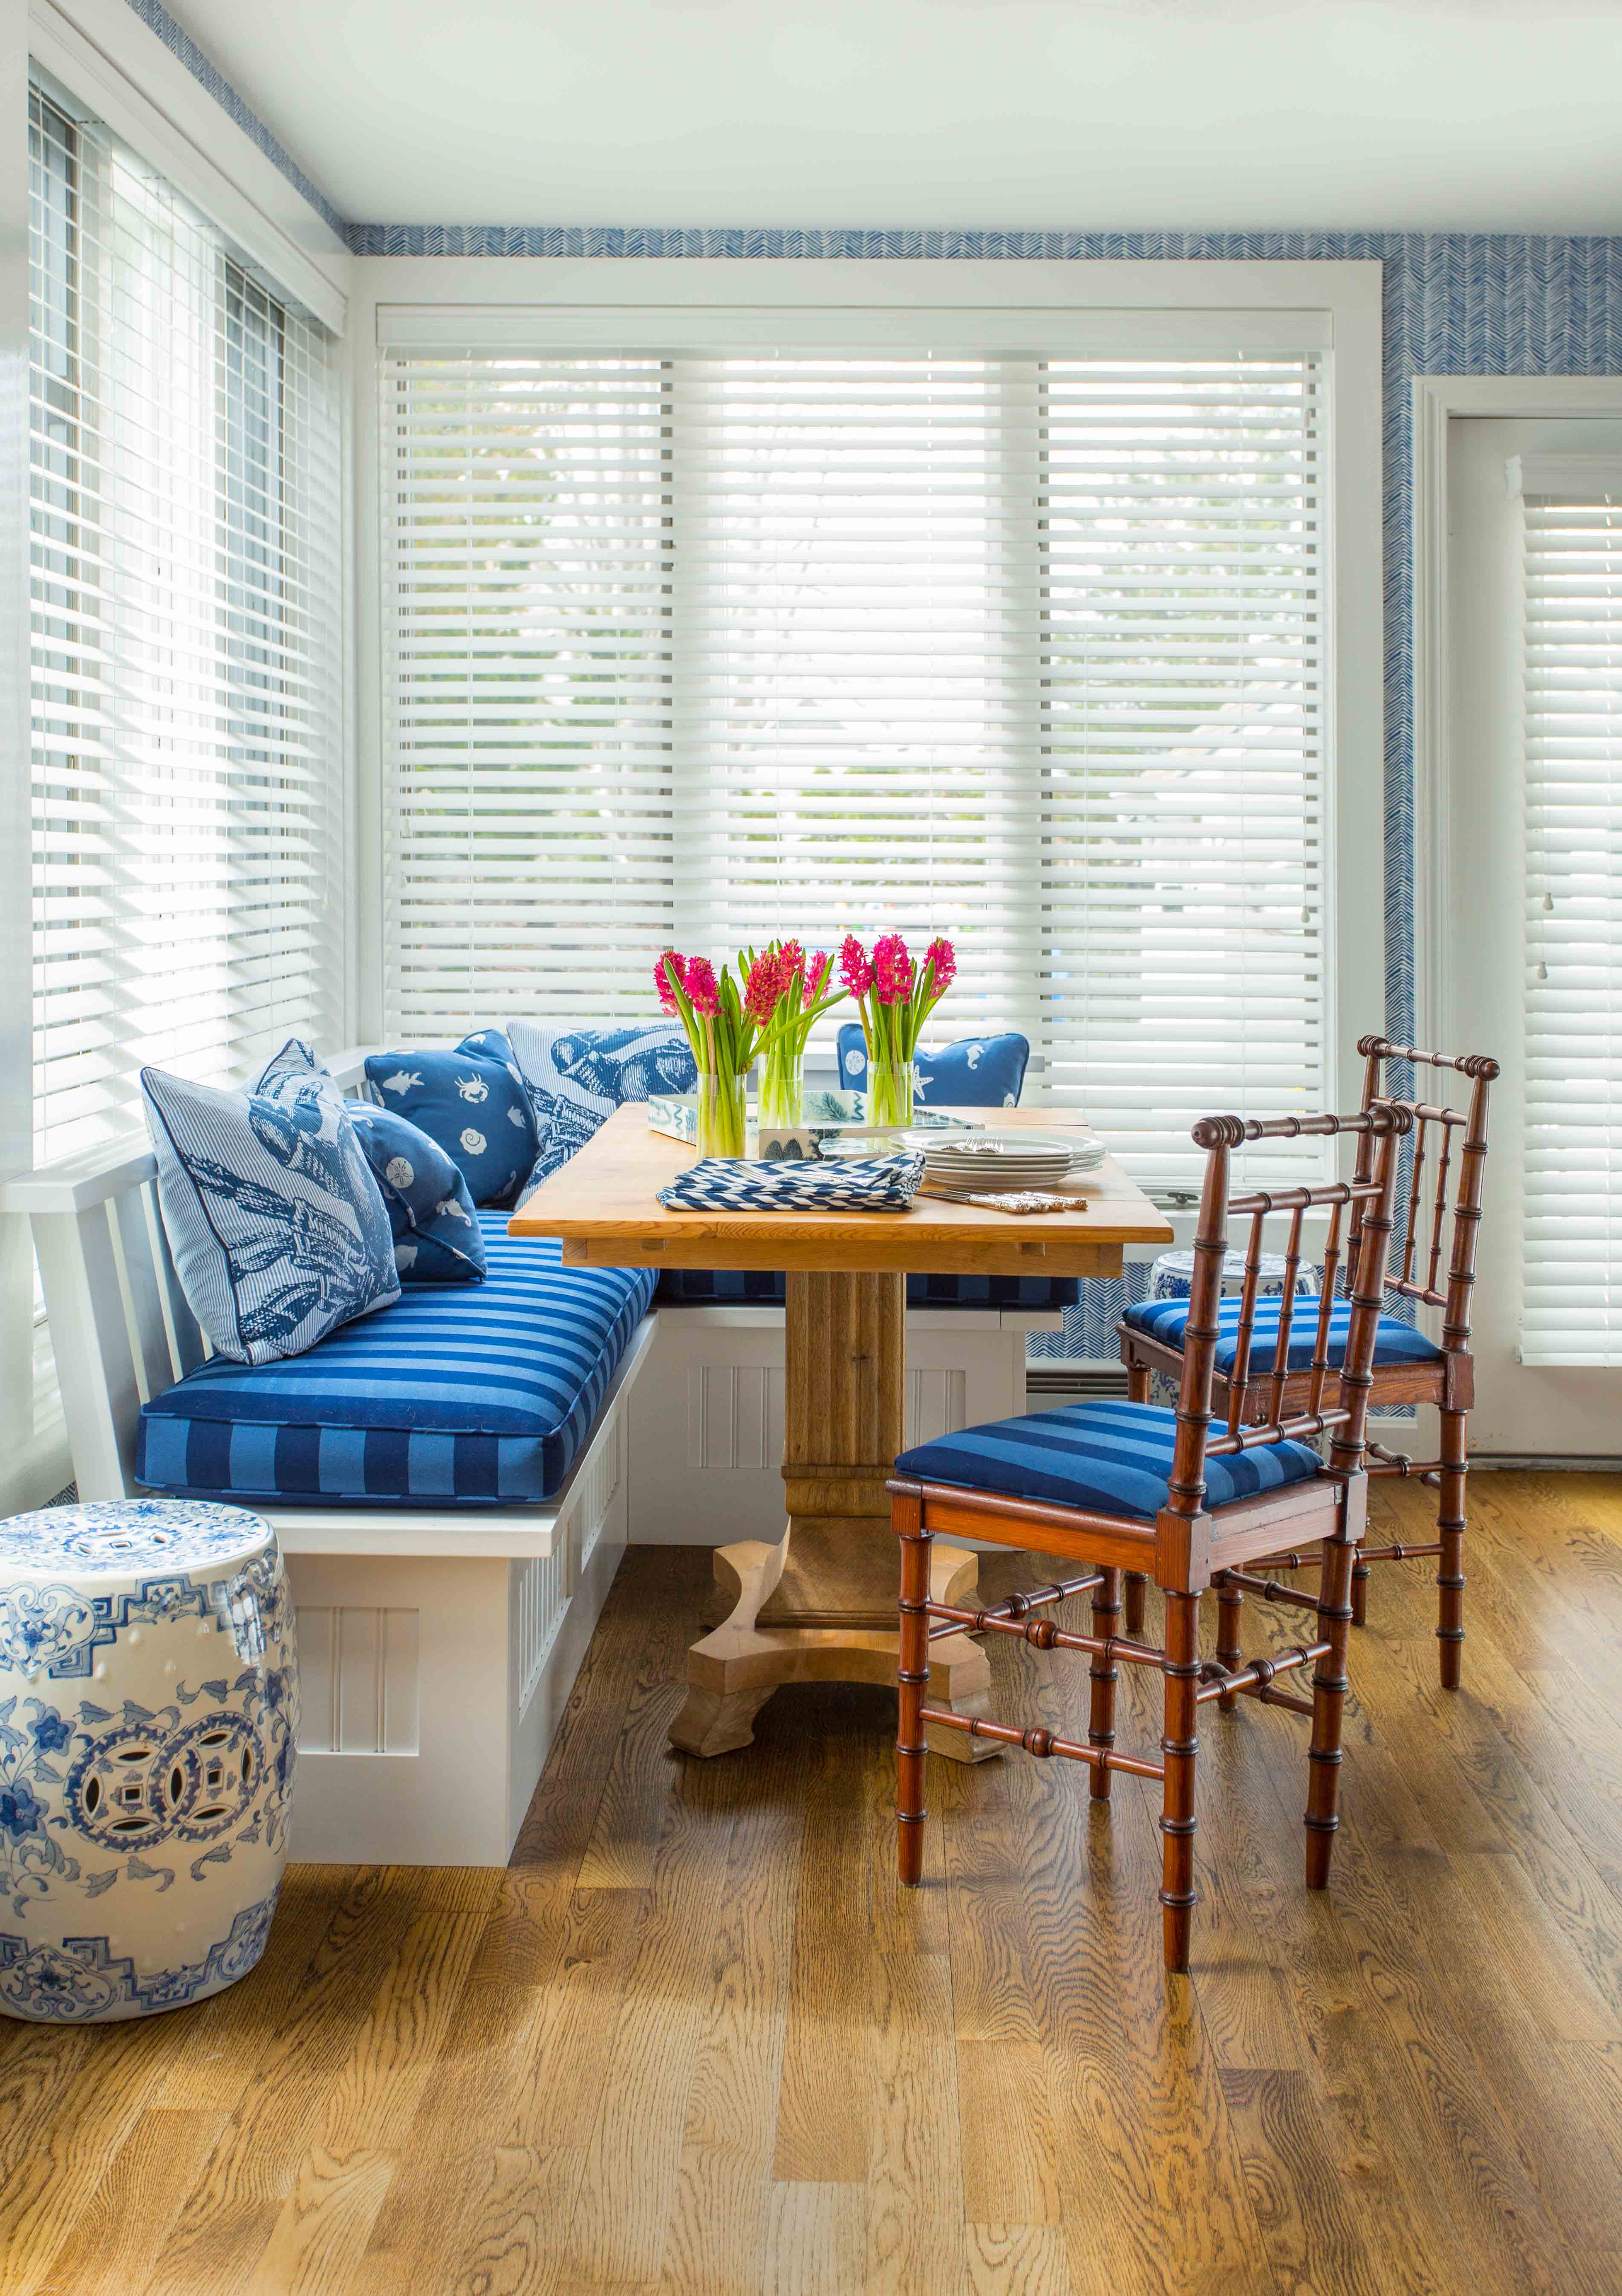 Embrace Summer with Decorating Tips from a Design Pro